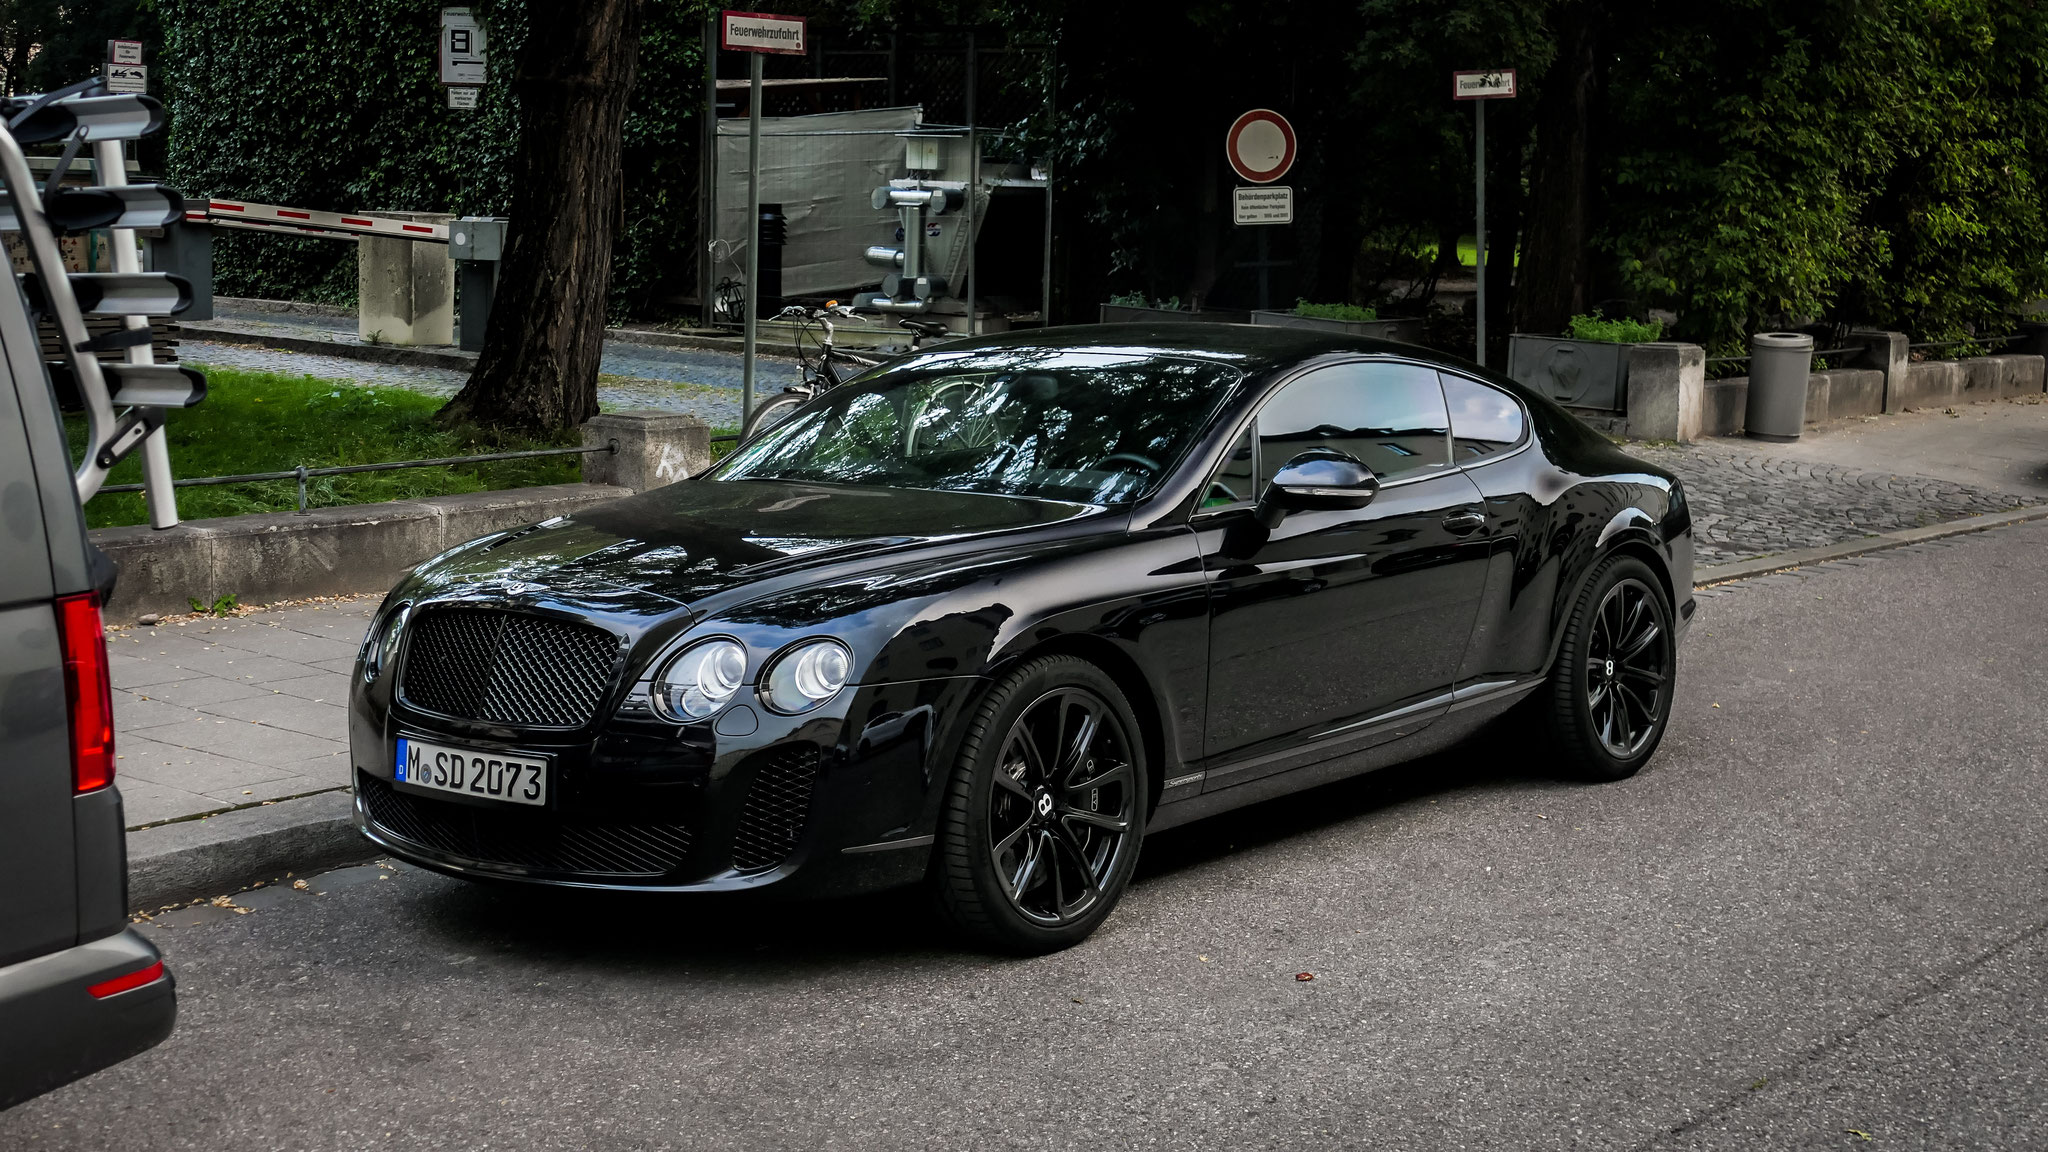 Bentley Continental GT Supersports - M-SD-2073